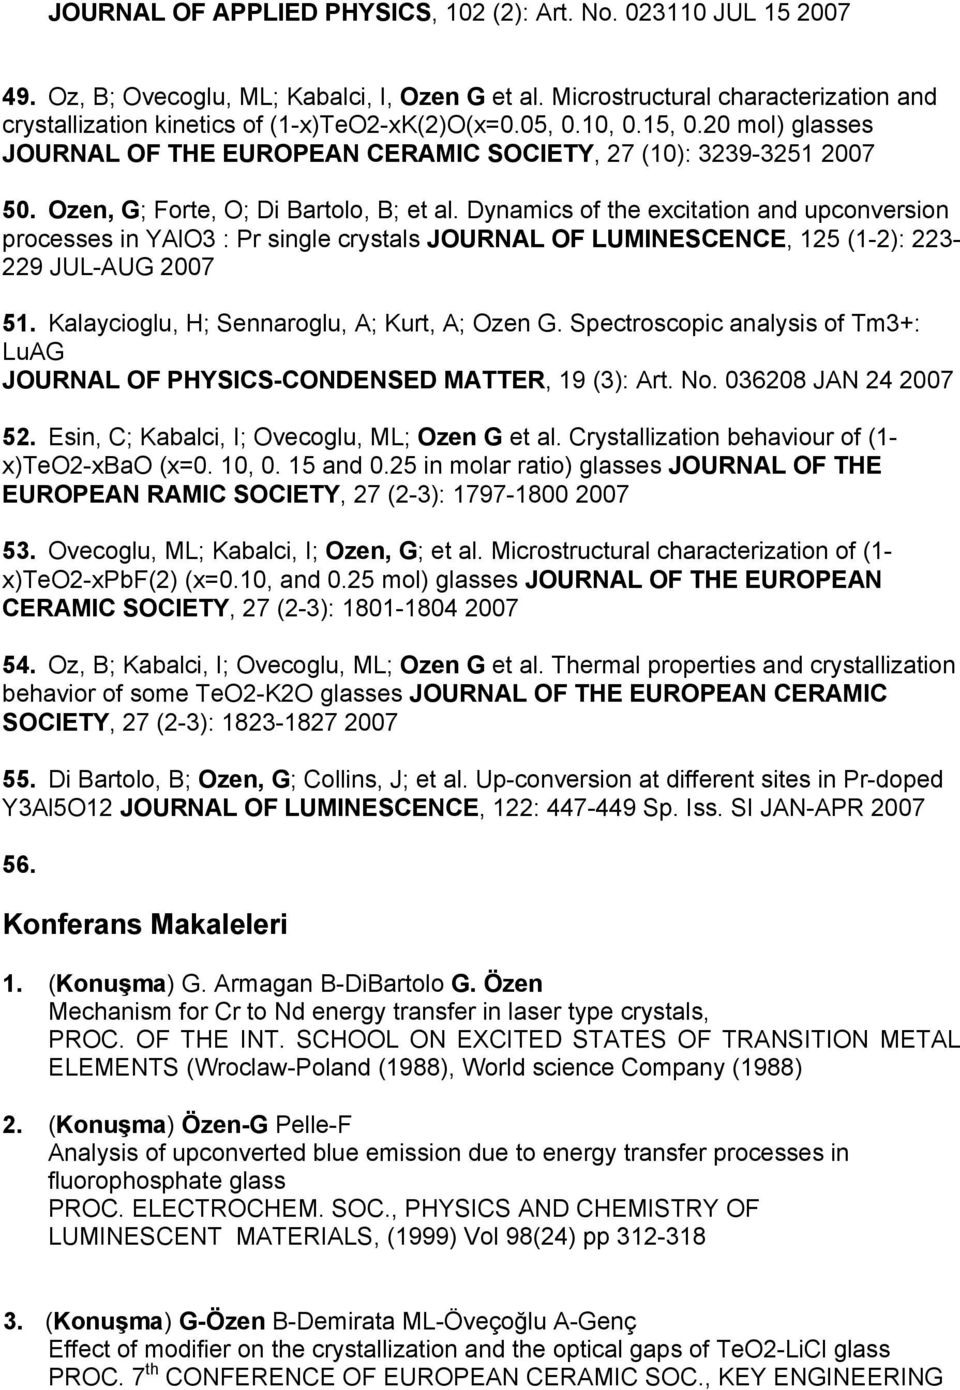 Ozen, G; Forte, O; Di Bartolo, B; et al. Dynamics of the excitation and upconversion processes in YAlO3 : Pr single crystals JOURNAL OF LUMINESCENCE, 125 (1-2): 223-229 JUL-AUG 2007 51.